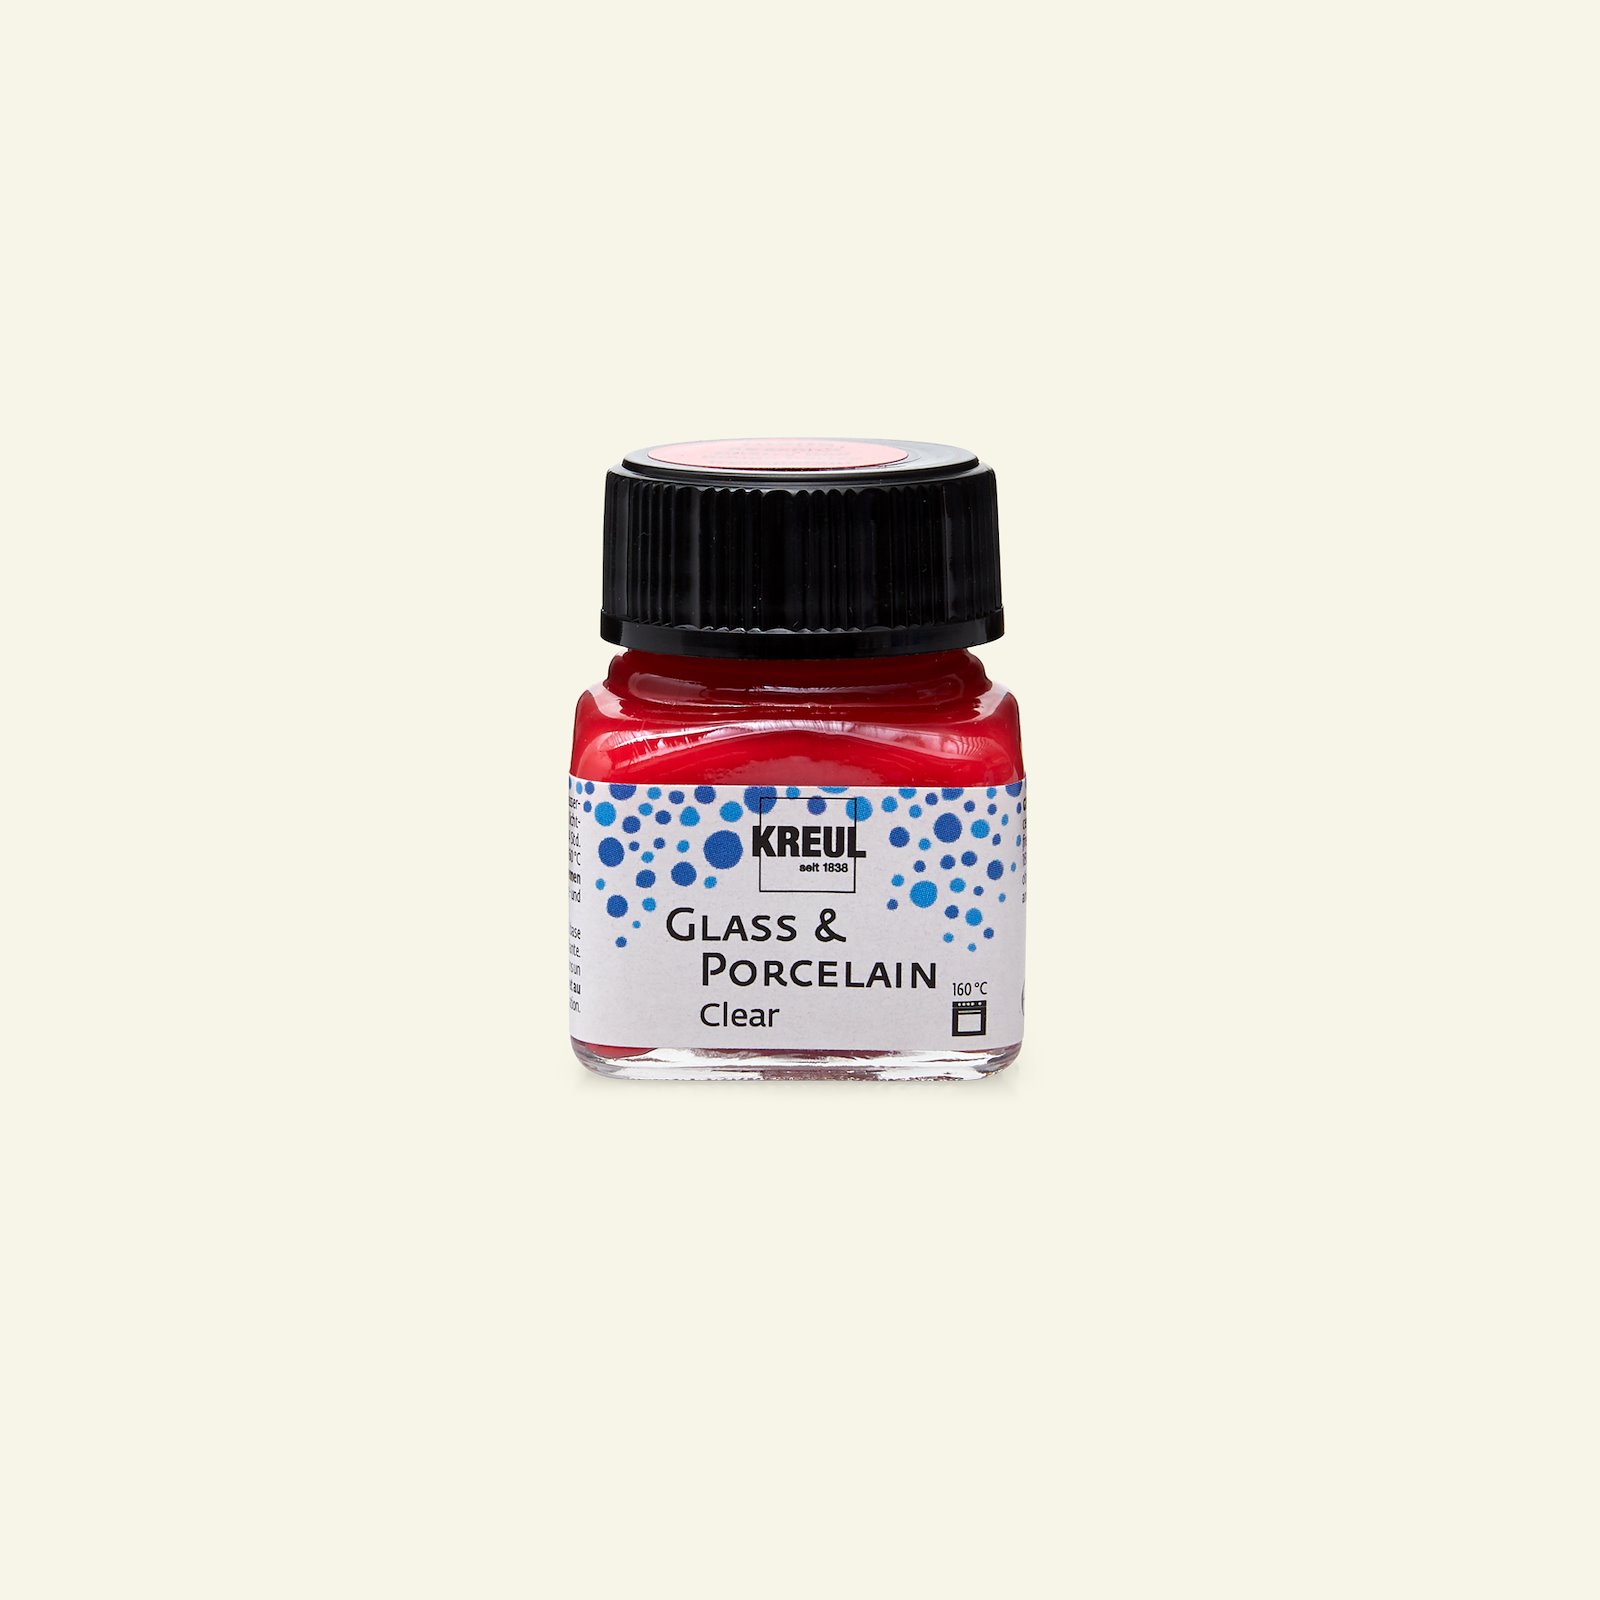 Glass&porcel. paint clear 20ml cherryred 31282_pack